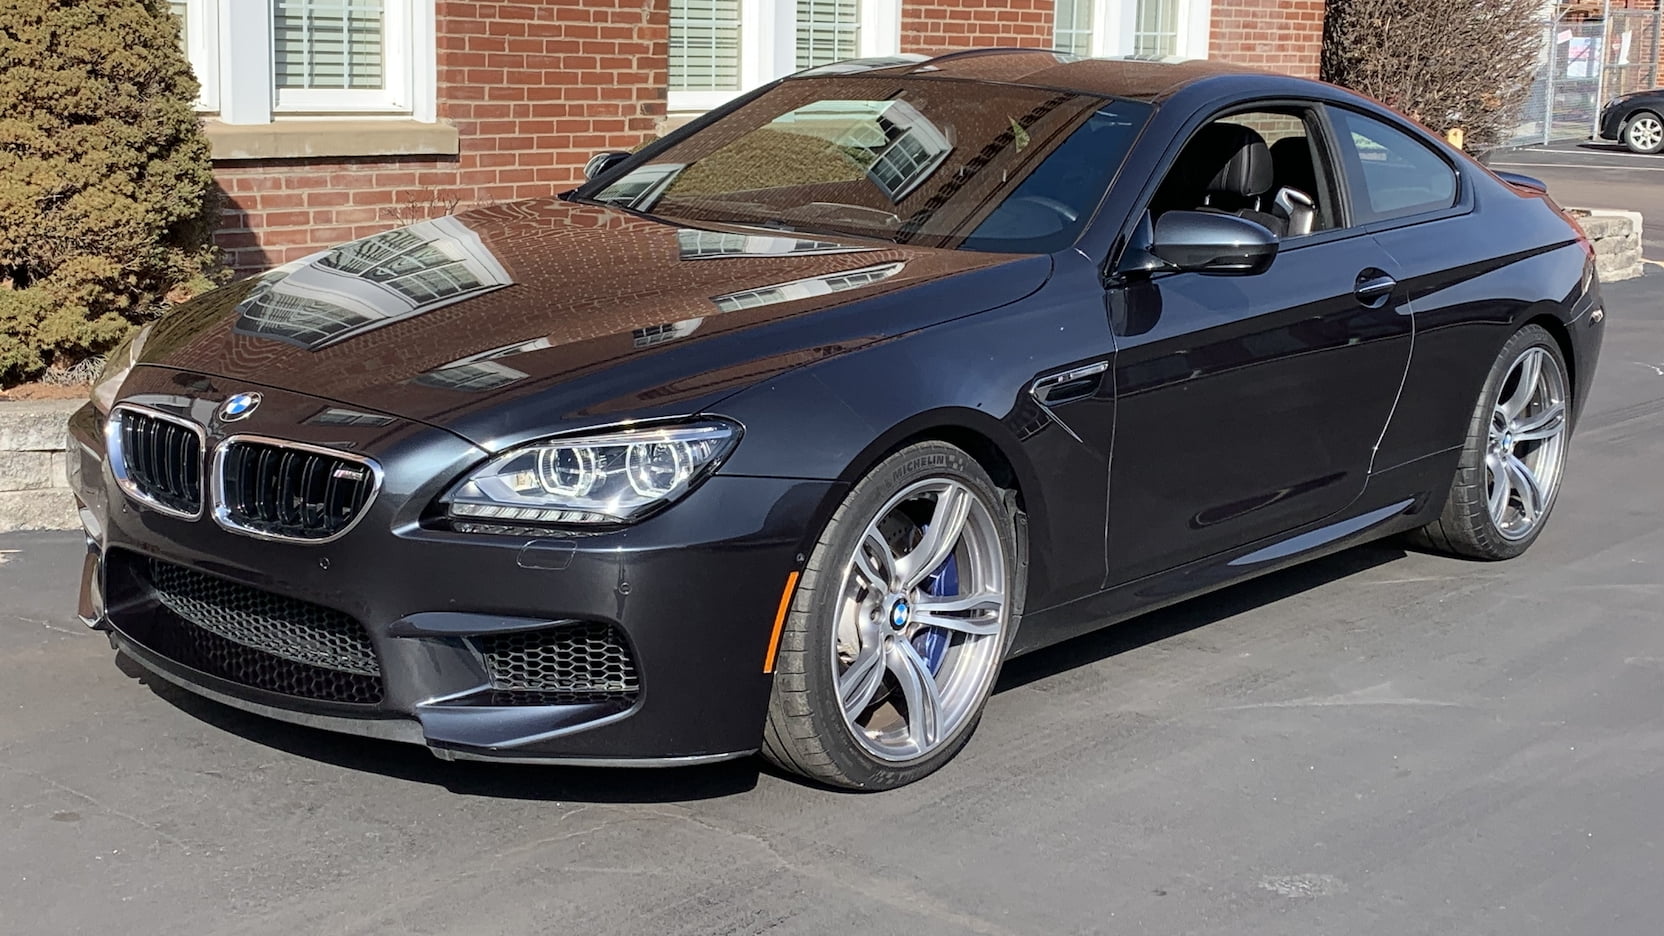 2013 BMW M6 Coupe | S36 | Glendale 2022